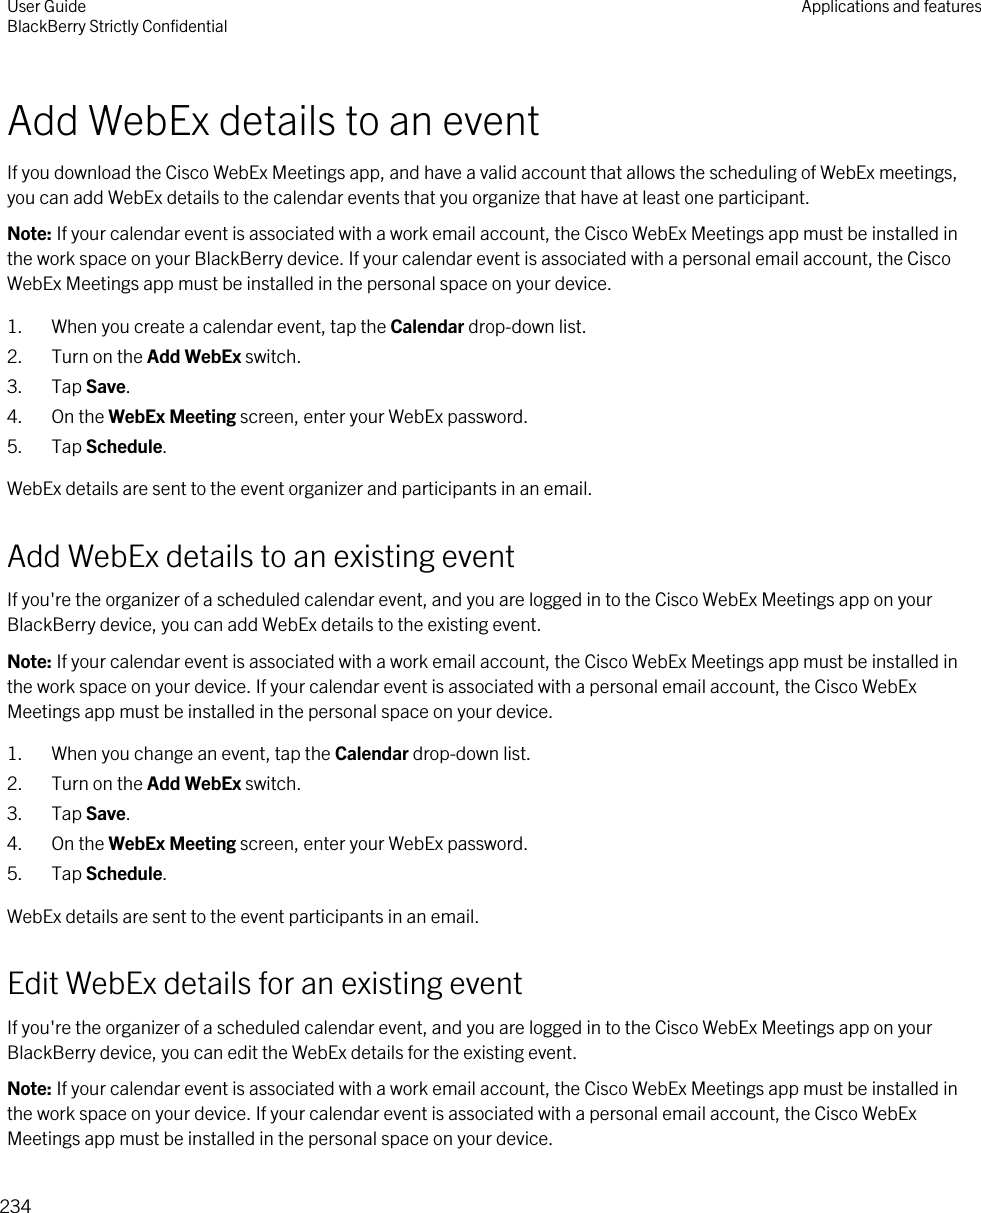 Add WebEx details to an eventIf you download the Cisco WebEx Meetings app, and have a valid account that allows the scheduling of WebEx meetings, you can add WebEx details to the calendar events that you organize that have at least one participant.Note: If your calendar event is associated with a work email account, the Cisco WebEx Meetings app must be installed in the work space on your BlackBerry device. If your calendar event is associated with a personal email account, the Cisco WebEx Meetings app must be installed in the personal space on your device.1. When you create a calendar event, tap the Calendar drop-down list.2. Turn on the Add WebEx switch.3. Tap Save.4. On the WebEx Meeting screen, enter your WebEx password.5. Tap Schedule.WebEx details are sent to the event organizer and participants in an email.Add WebEx details to an existing eventIf you&apos;re the organizer of a scheduled calendar event, and you are logged in to the Cisco WebEx Meetings app on your BlackBerry device, you can add WebEx details to the existing event.Note: If your calendar event is associated with a work email account, the Cisco WebEx Meetings app must be installed in the work space on your device. If your calendar event is associated with a personal email account, the Cisco WebEx Meetings app must be installed in the personal space on your device.1. When you change an event, tap the Calendar drop-down list.2. Turn on the Add WebEx switch.3. Tap Save.4. On the WebEx Meeting screen, enter your WebEx password.5. Tap Schedule.WebEx details are sent to the event participants in an email.Edit WebEx details for an existing eventIf you&apos;re the organizer of a scheduled calendar event, and you are logged in to the Cisco WebEx Meetings app on your BlackBerry device, you can edit the WebEx details for the existing event.Note: If your calendar event is associated with a work email account, the Cisco WebEx Meetings app must be installed in the work space on your device. If your calendar event is associated with a personal email account, the Cisco WebEx Meetings app must be installed in the personal space on your device.User GuideBlackBerry Strictly Confidential Applications and features234